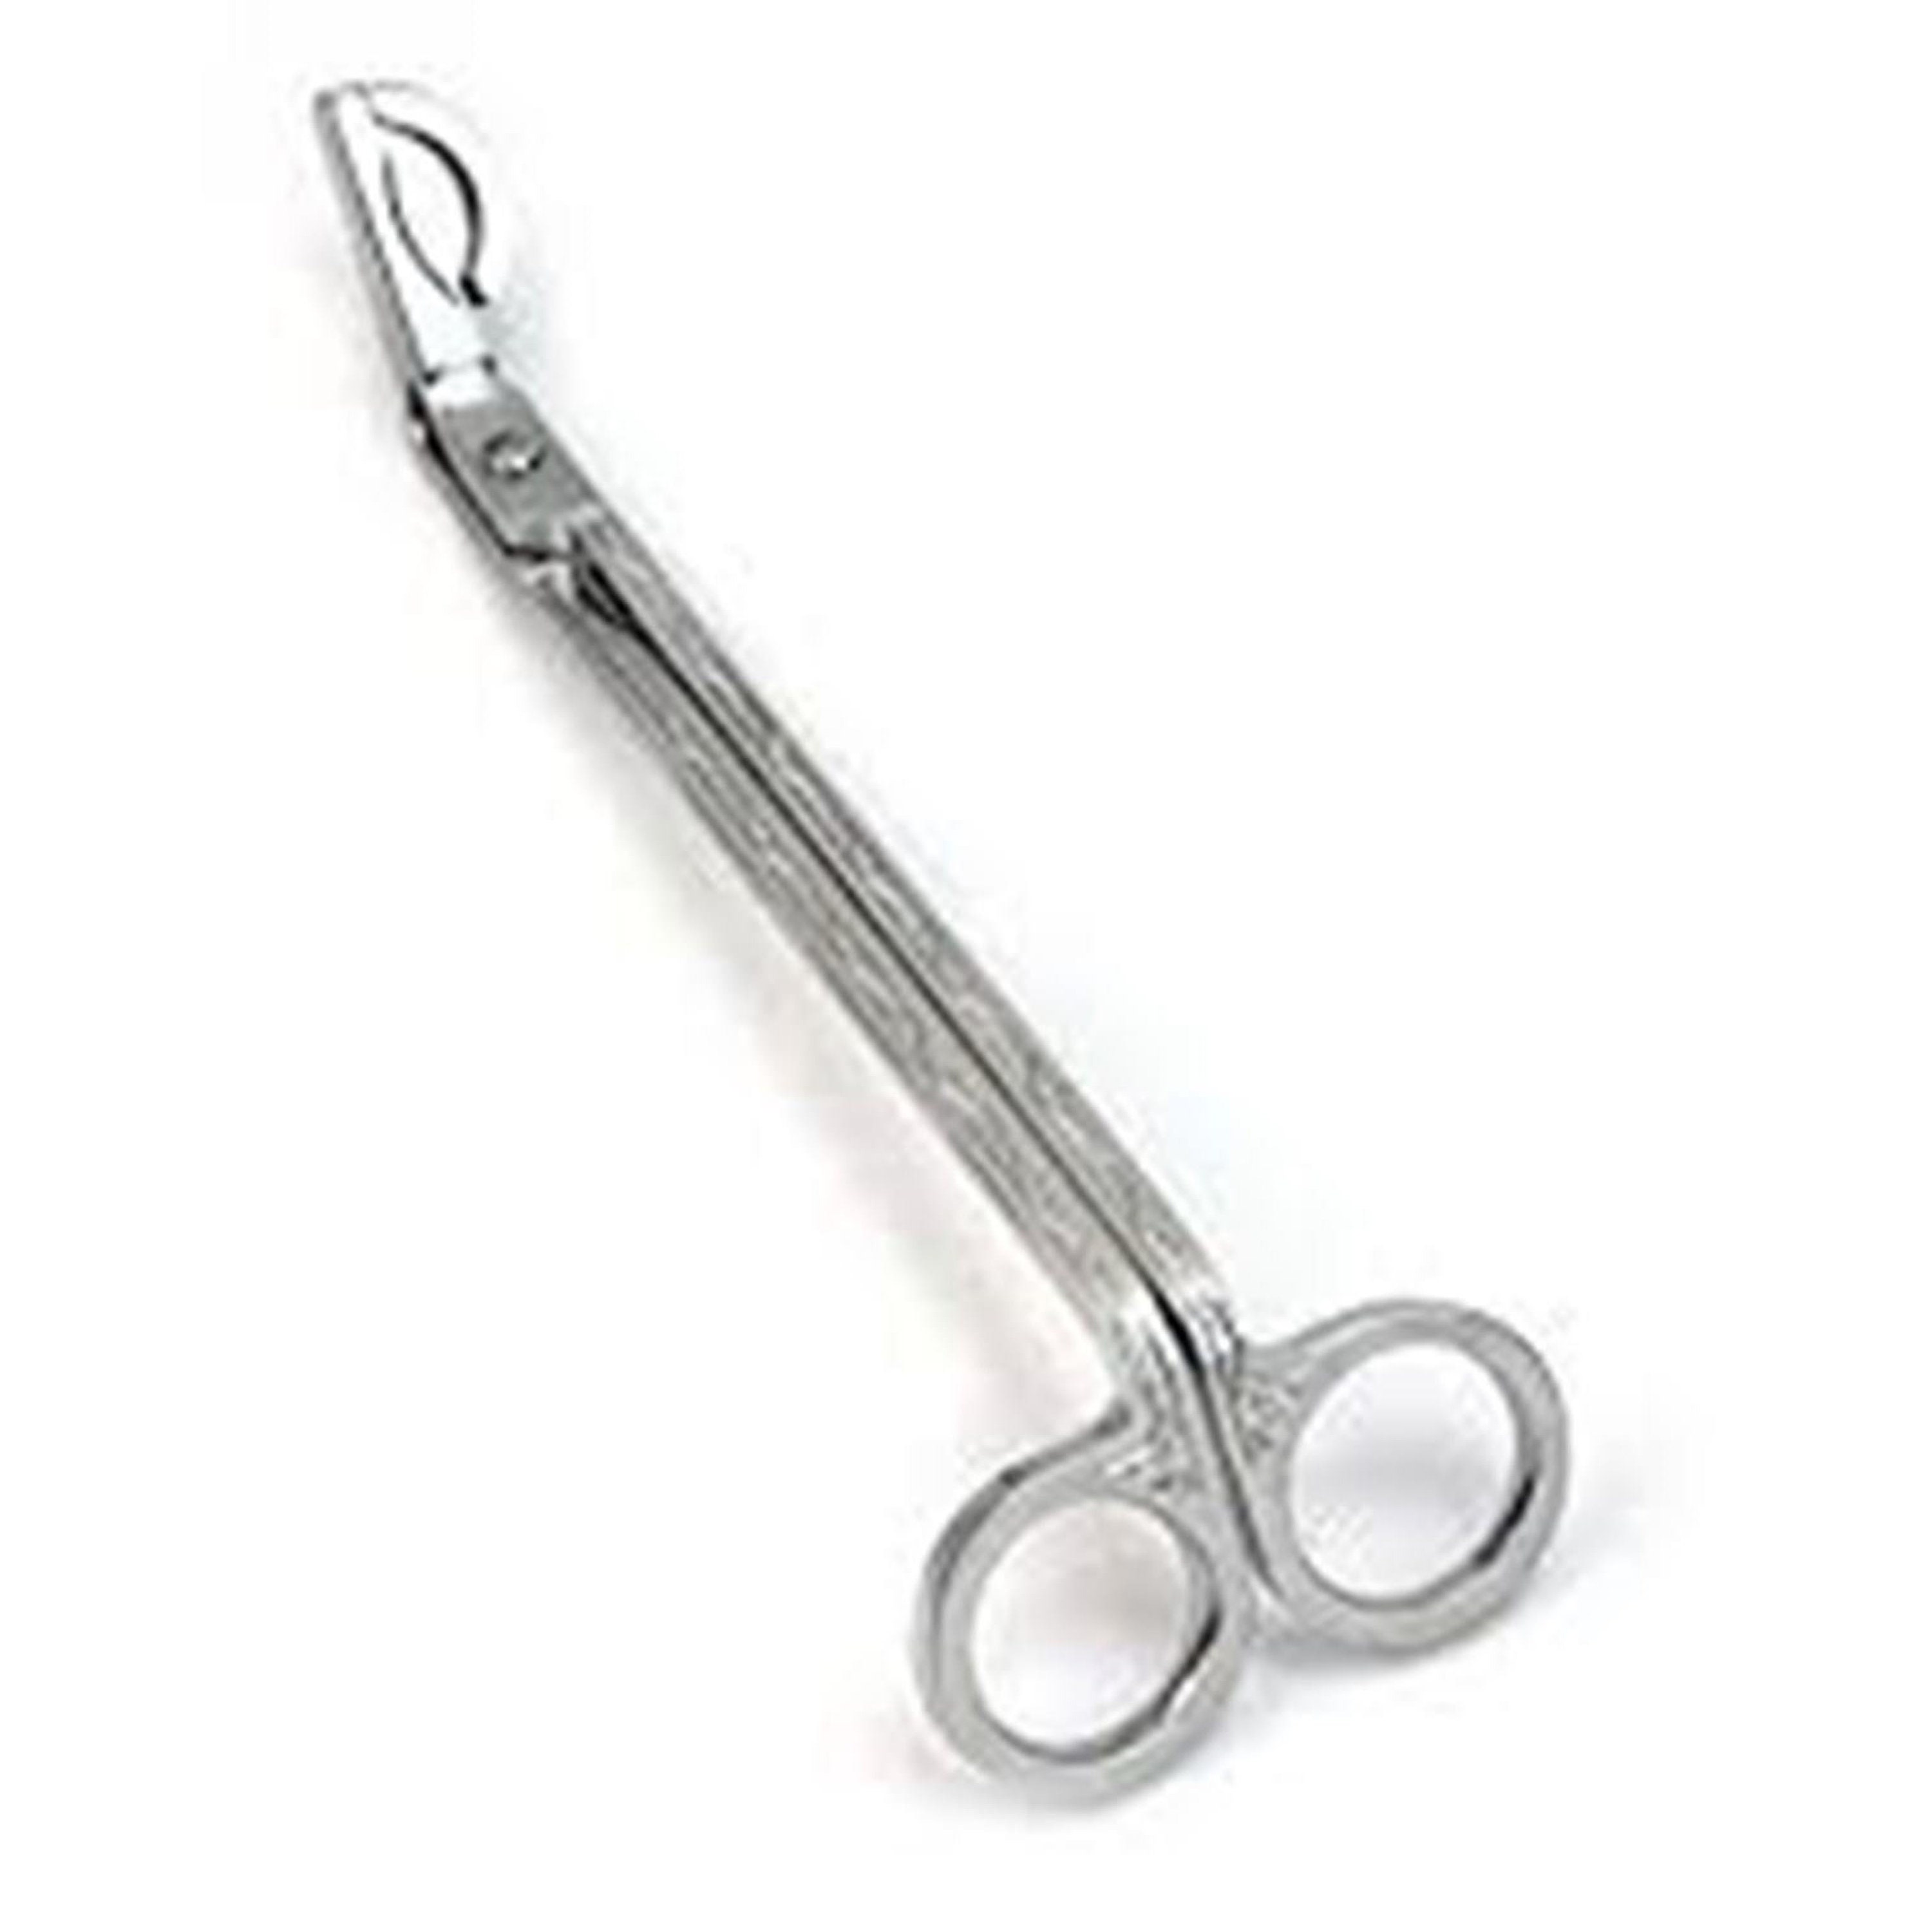 Wick Trimmer, Candle Wick Trimmer, Candle Scissors, Wick Scissors, Wick  Cutter, Candle Tool, Candle Accessory, Silver, Wick Tool, Trim Wick 